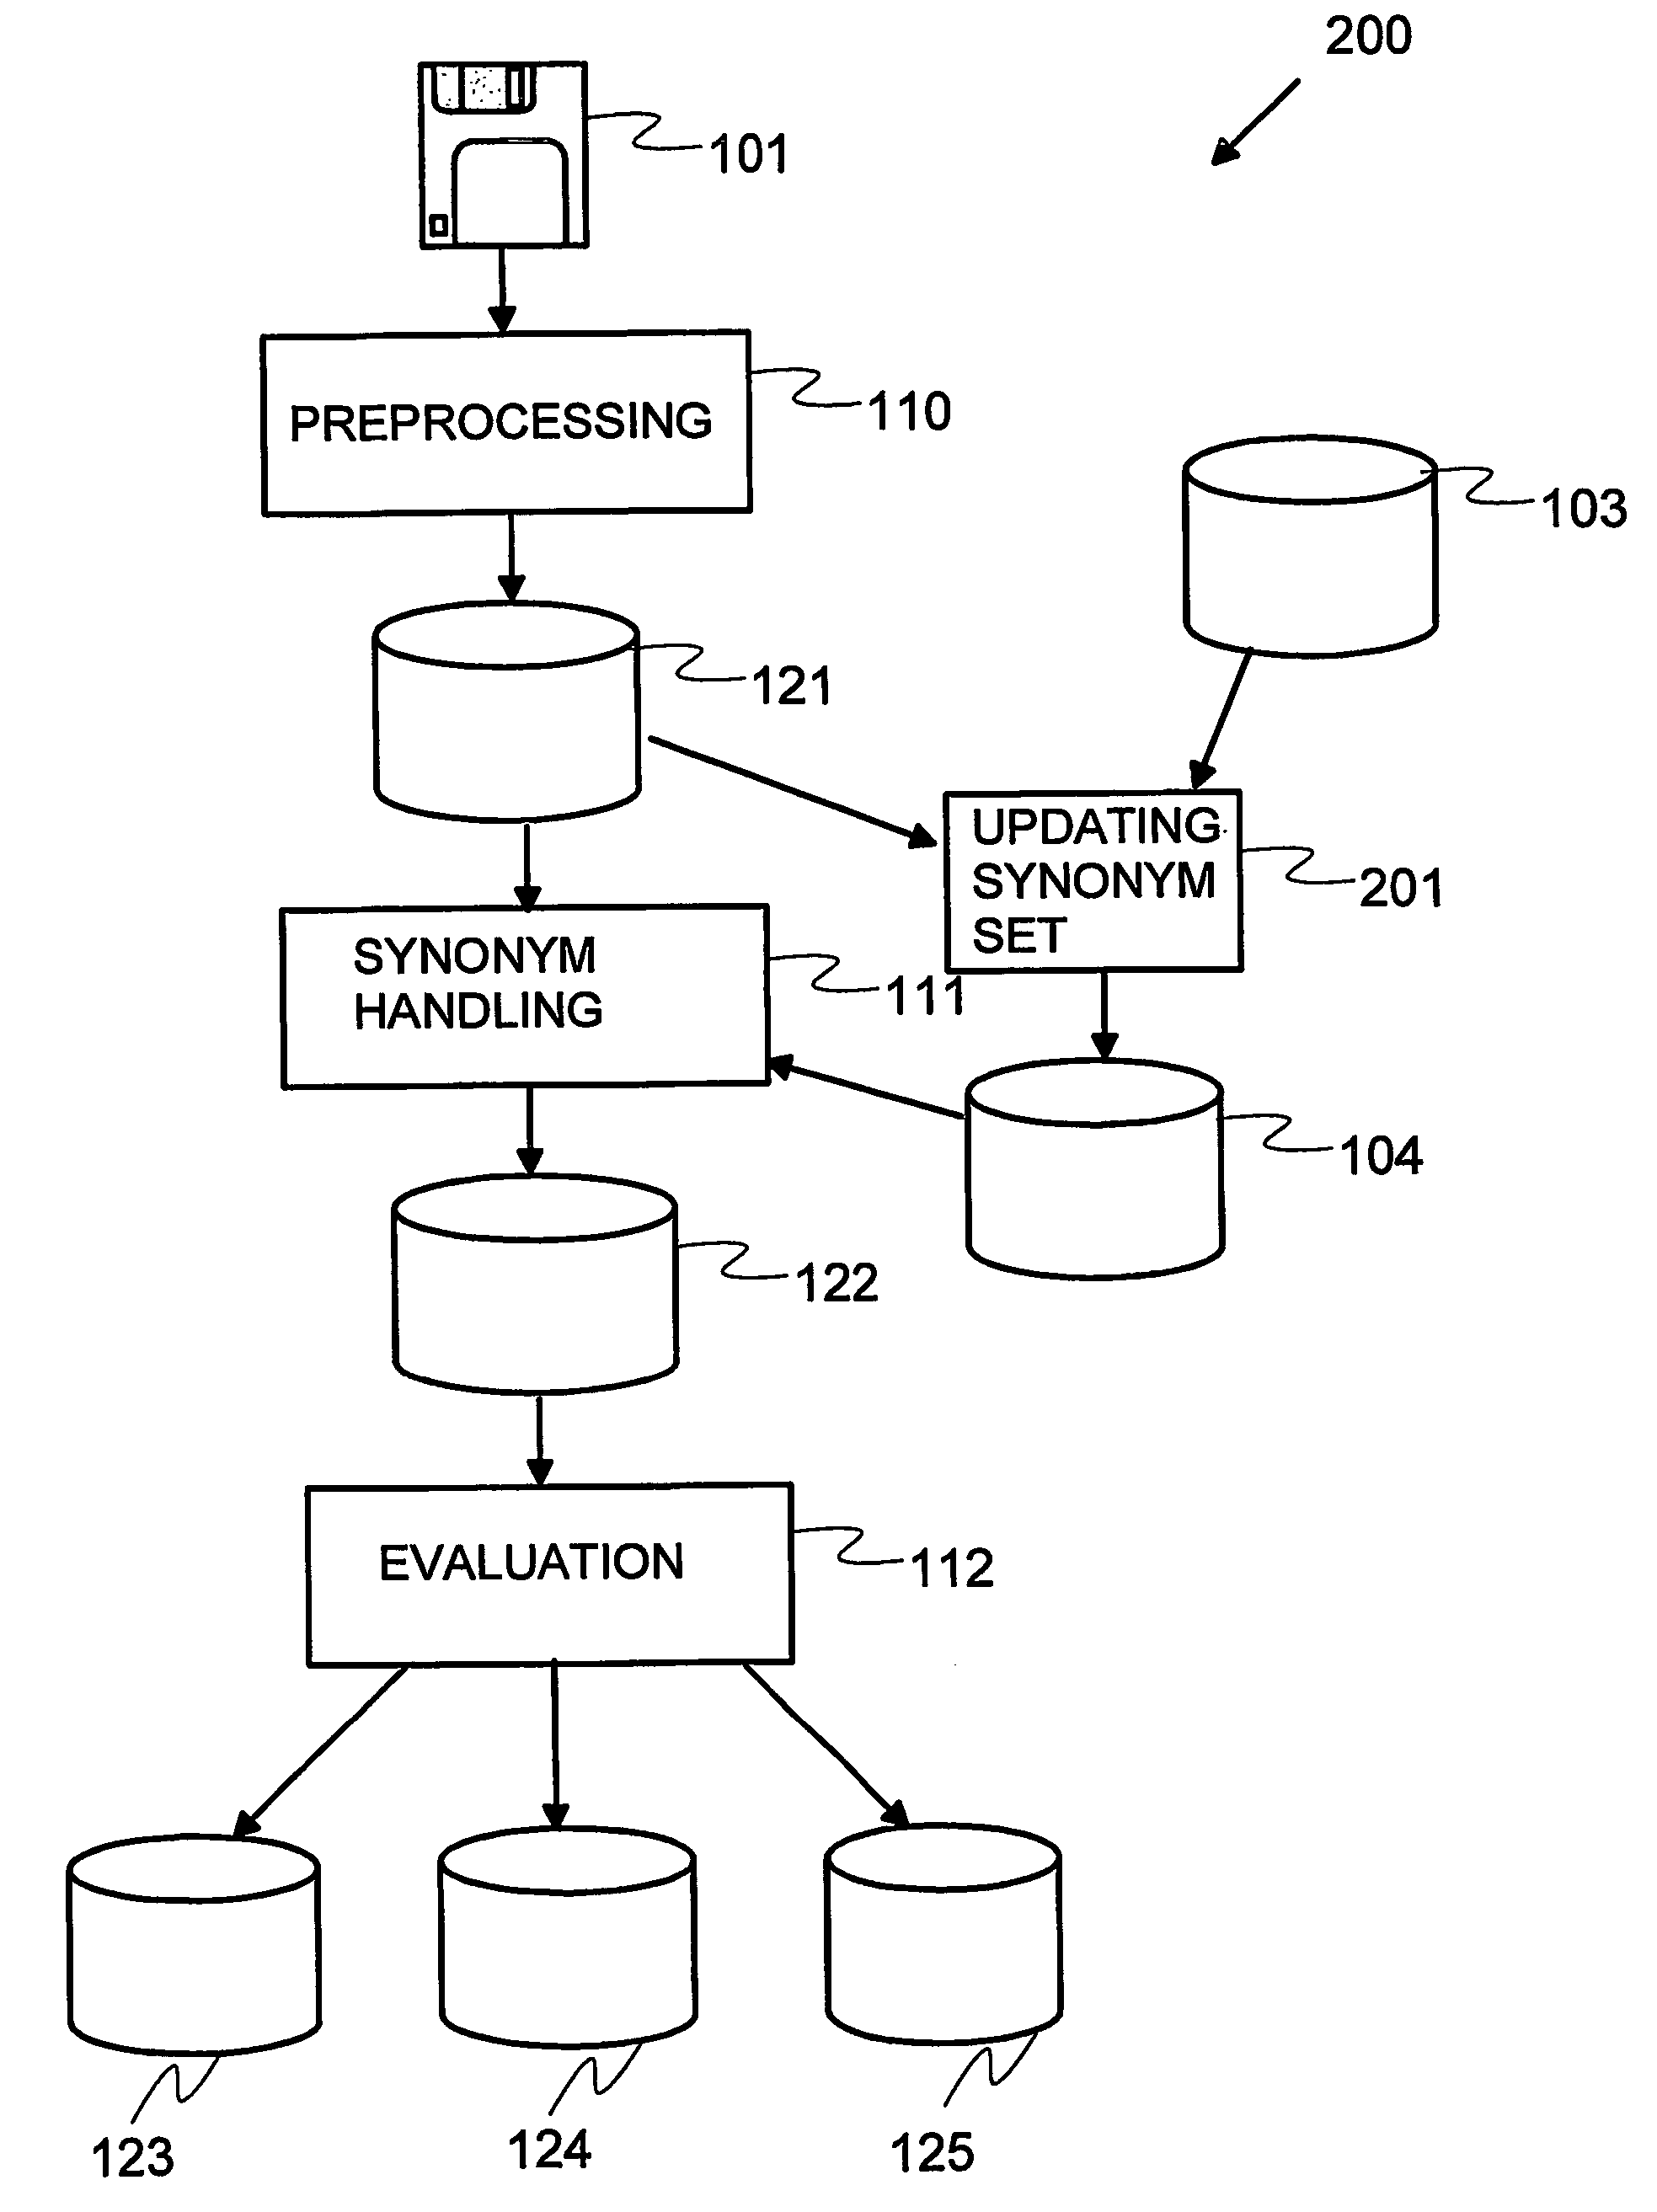 Processing data records for finding counterparts in a reference data set